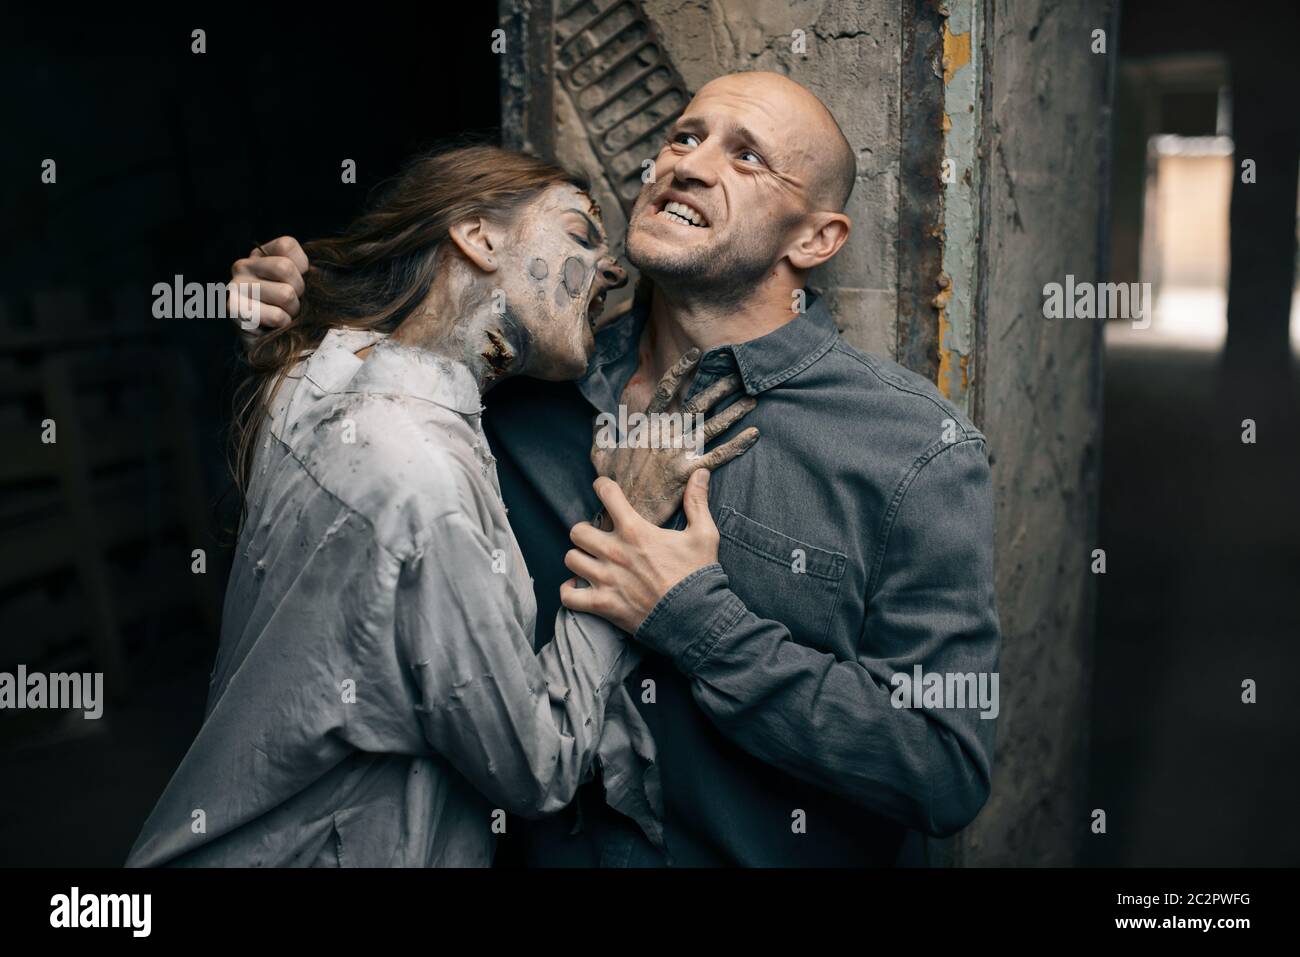 Female zombie bites a man in the neck, death trap, deadly chase. Horror in city, creepy crawlies attack, doomsday apocalypse Stock Photo